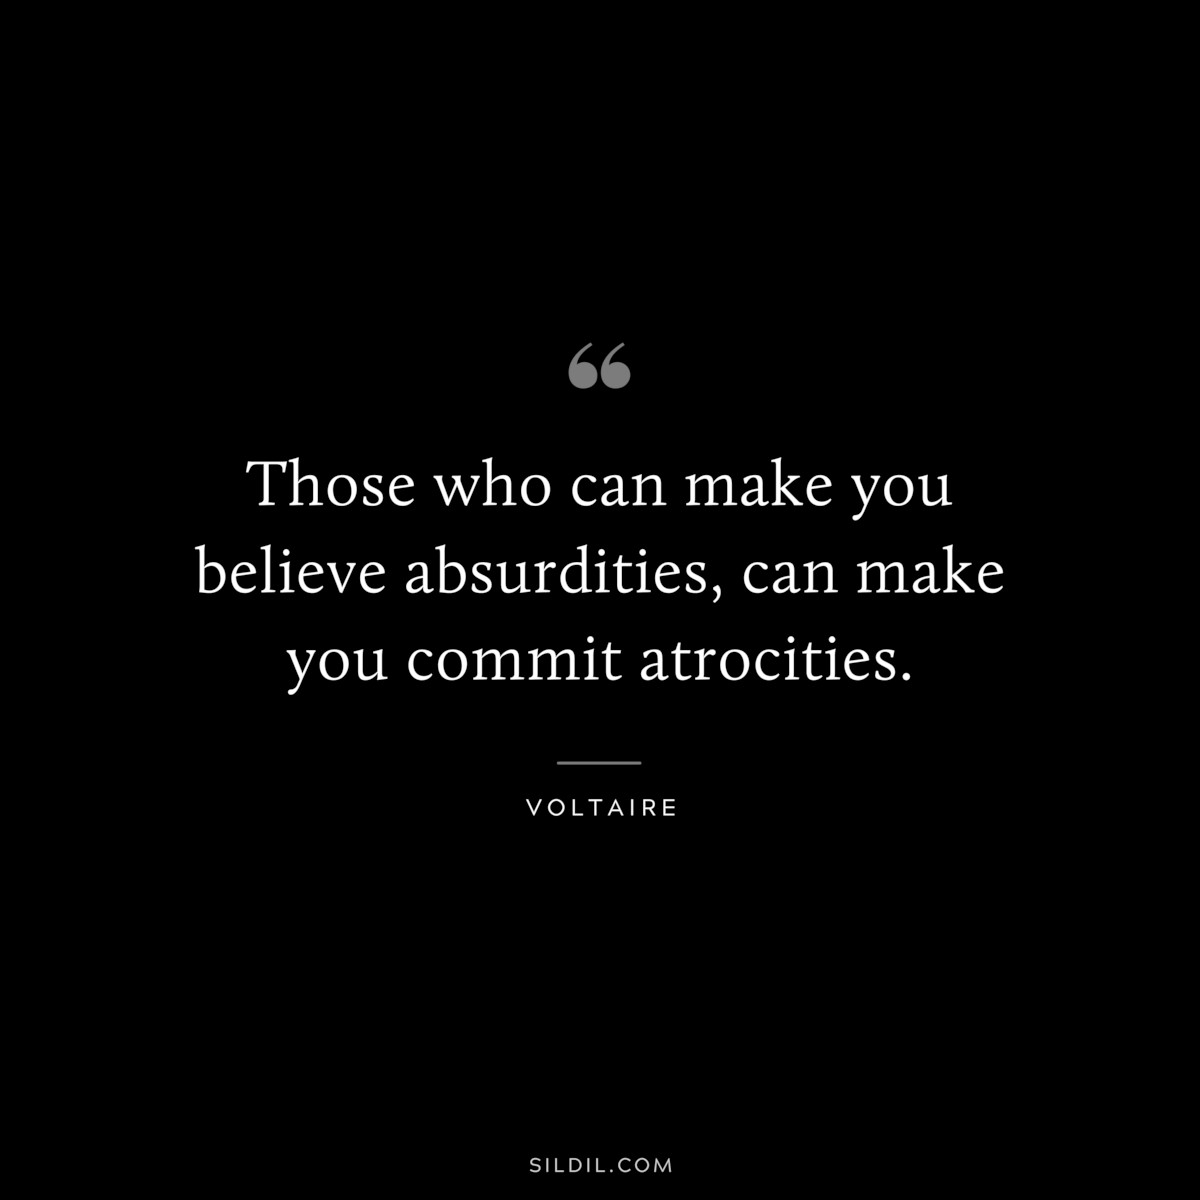 Those who can make you believe absurdities, can make you commit atrocities. ― Voltaire